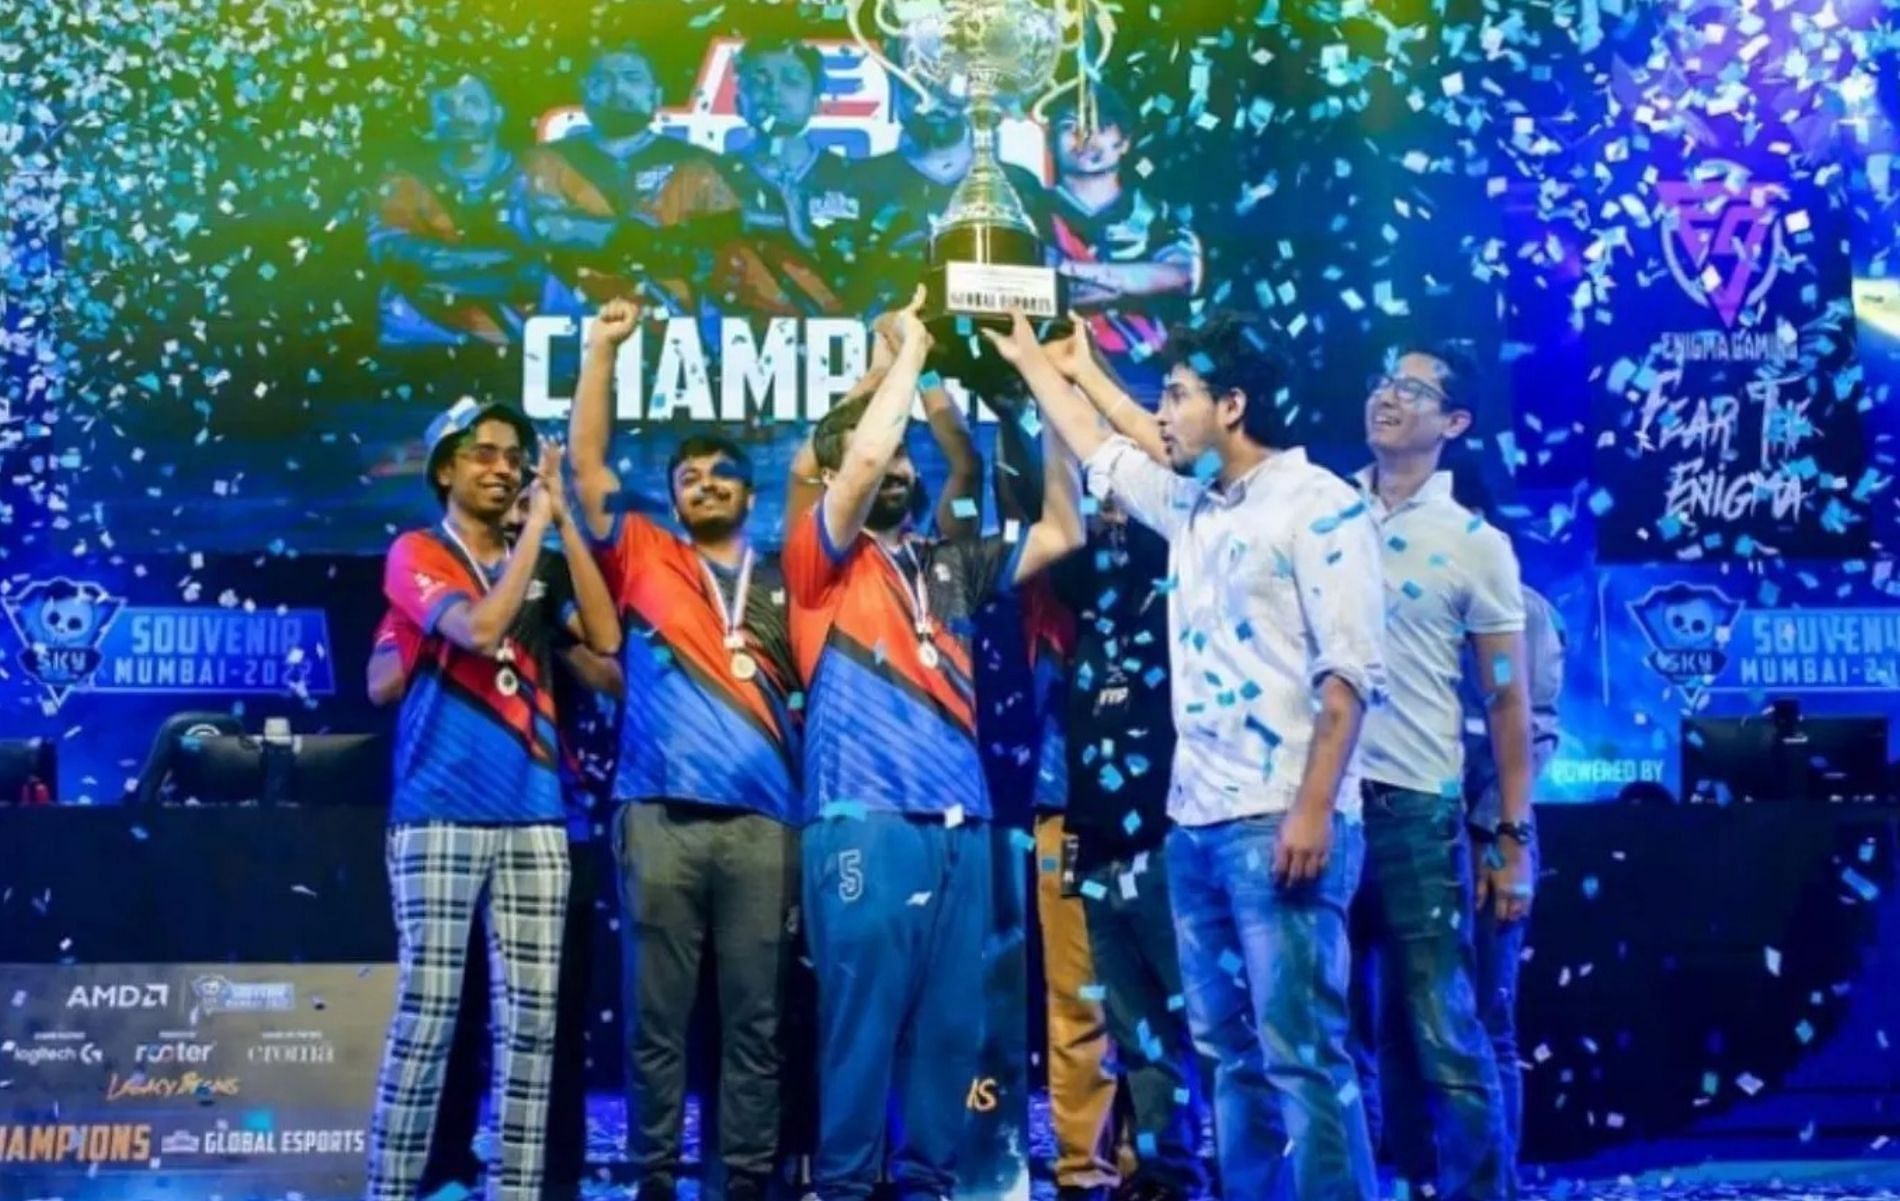 Global Esports to create a 10-player Valorant roster ahead of VCT 2023 kickoff tournament. (Image via Skyesports)